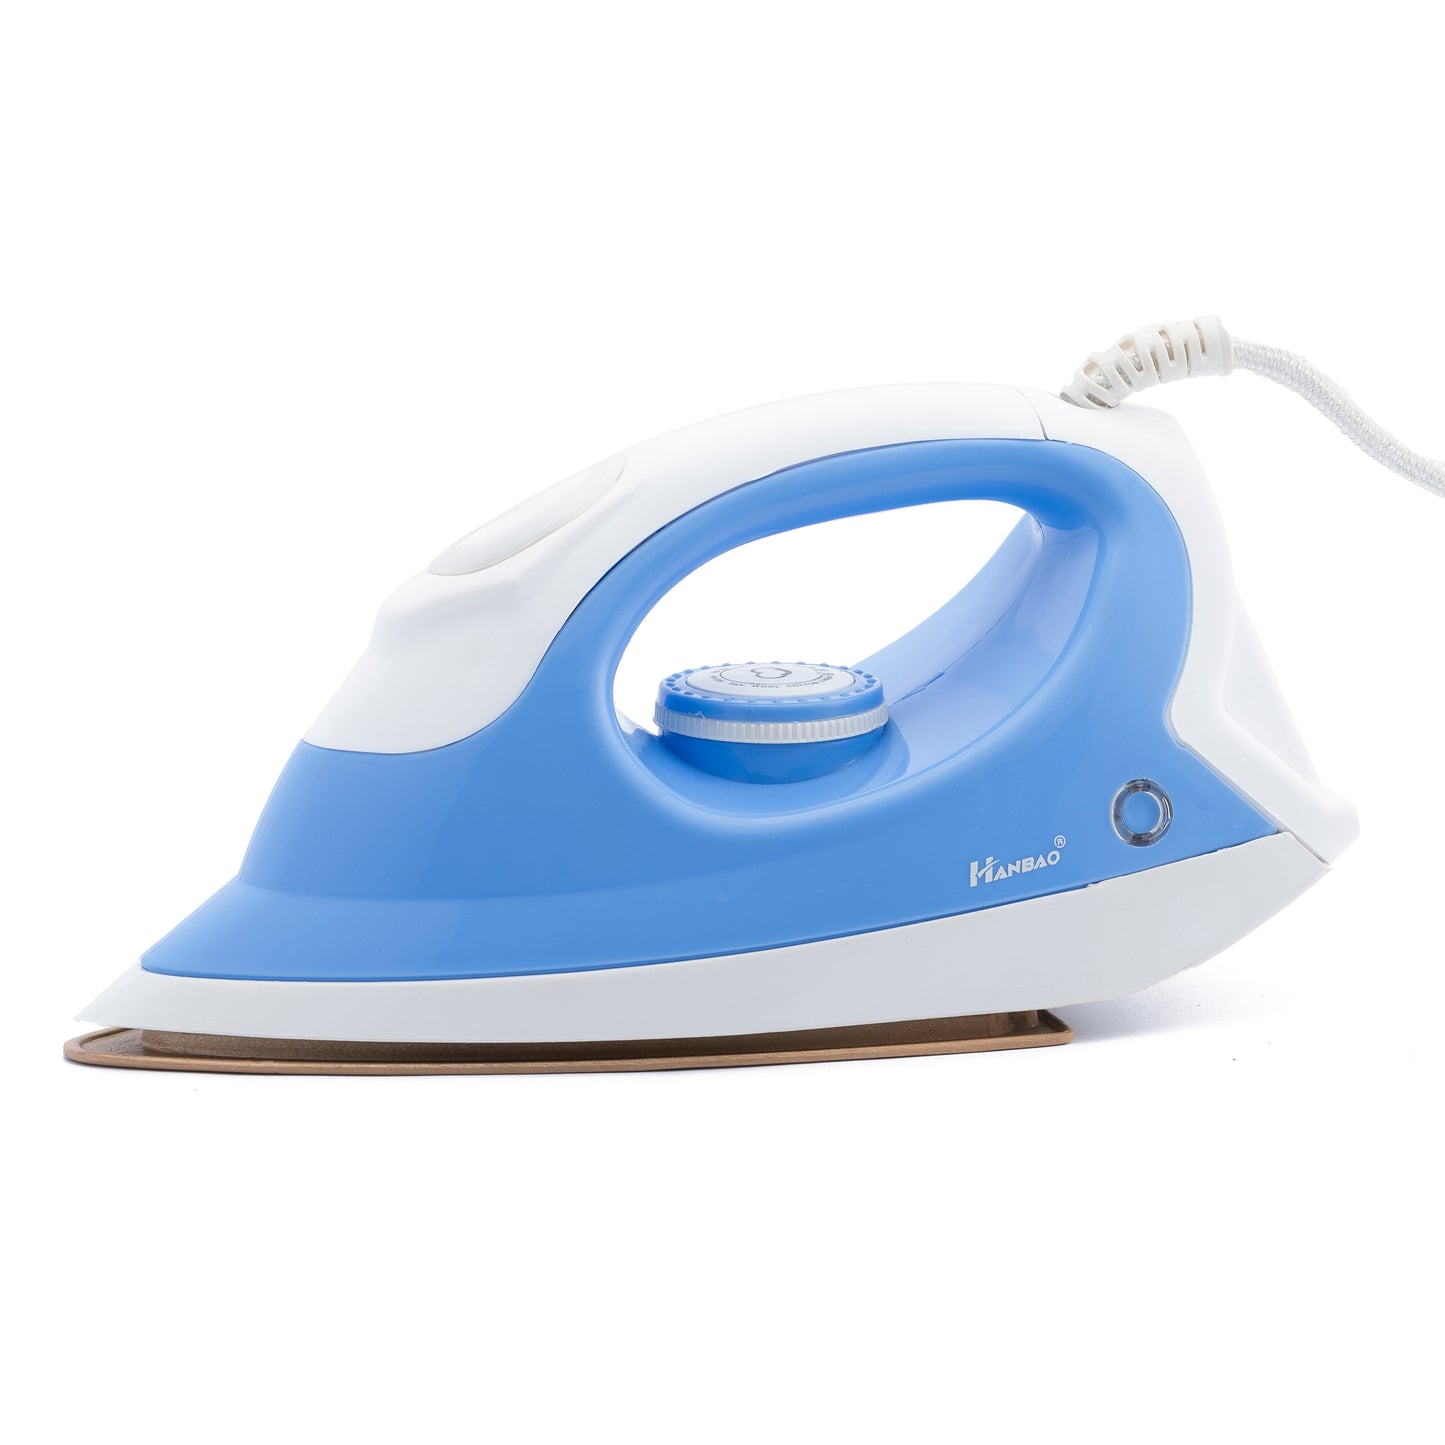 HANBAO 1000W Electric Dry Iron with LED Indicator, QUEEN PRO, 2 Years Warranty*